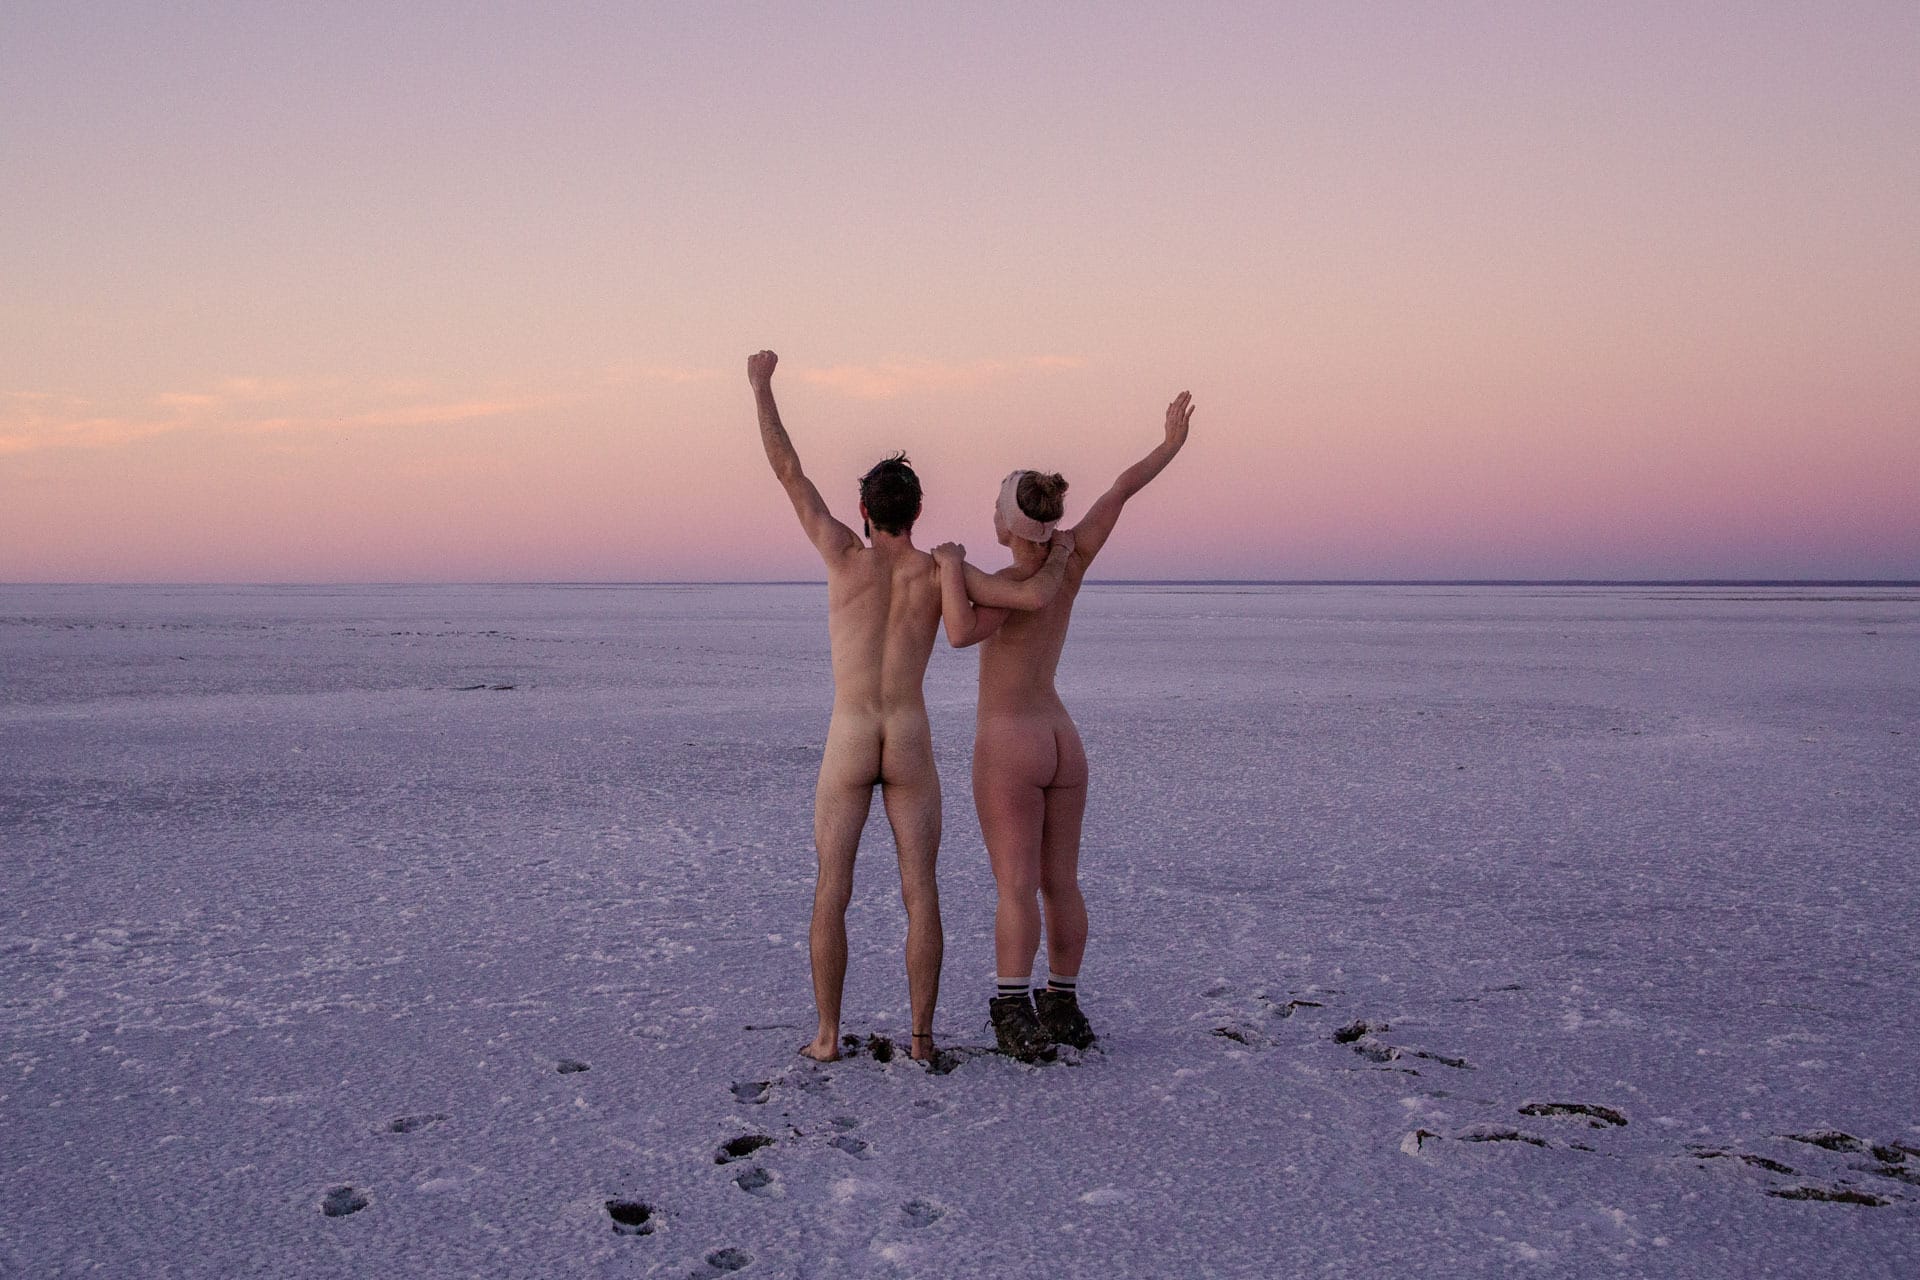 How To Get Nude for Mother Nature (Hint: She’s Seen It Before), joe brn Cuzzocrea, nude, Sunrise over Lake Eyre, South australia